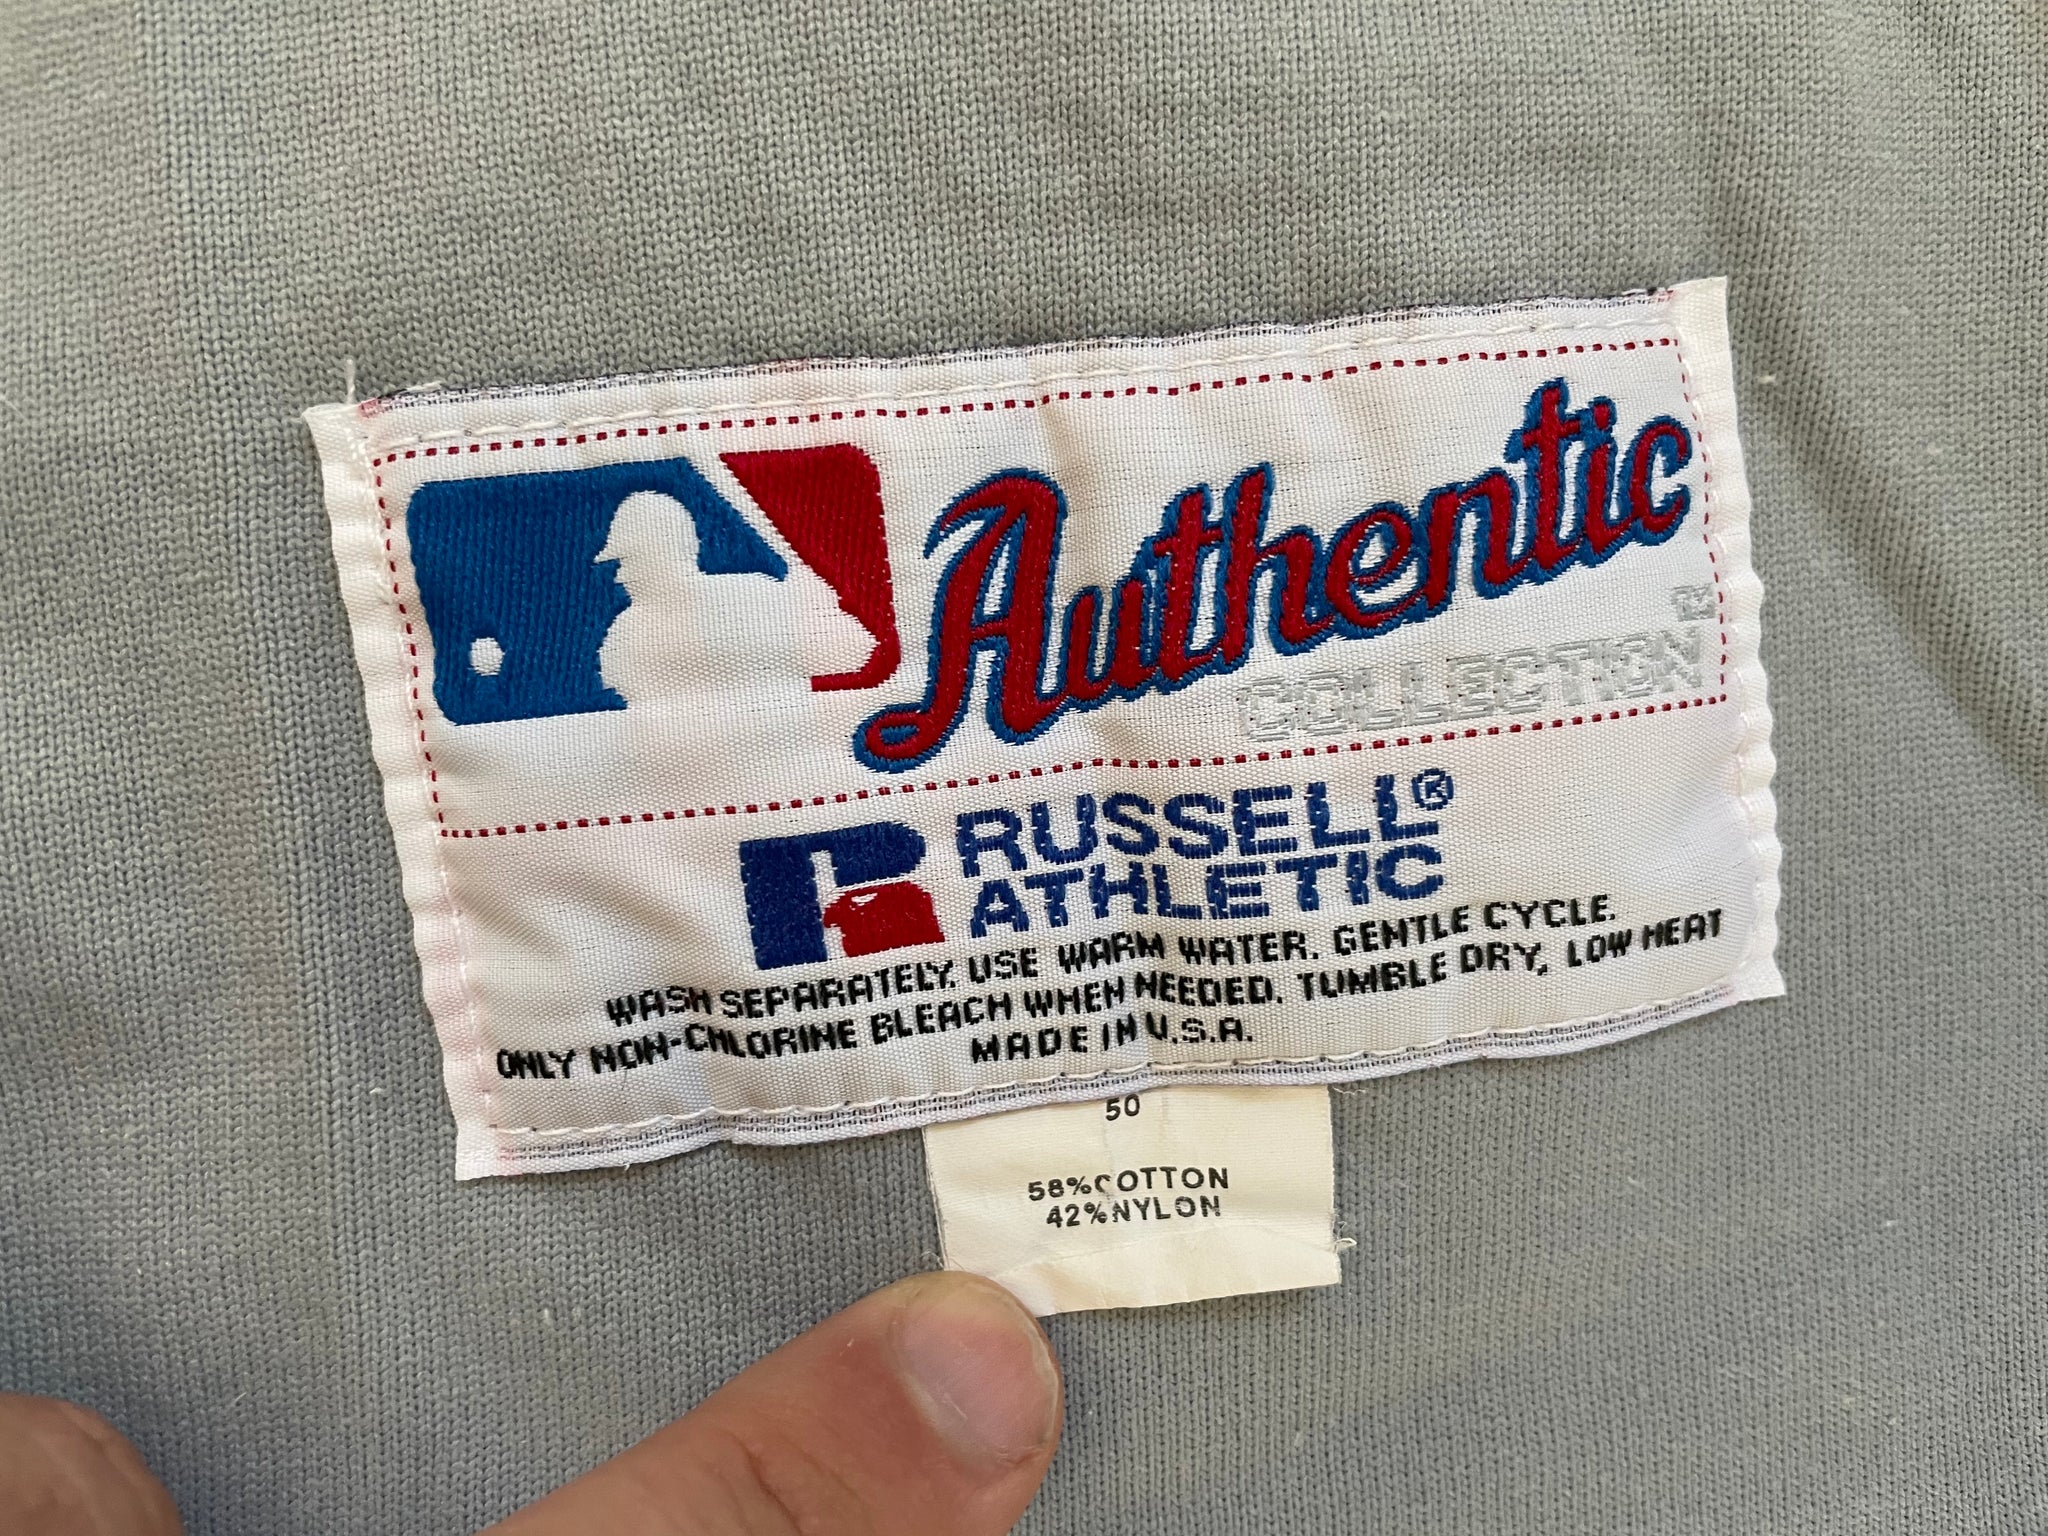 Vintage Majestic Athletic Authentic Collection MLB